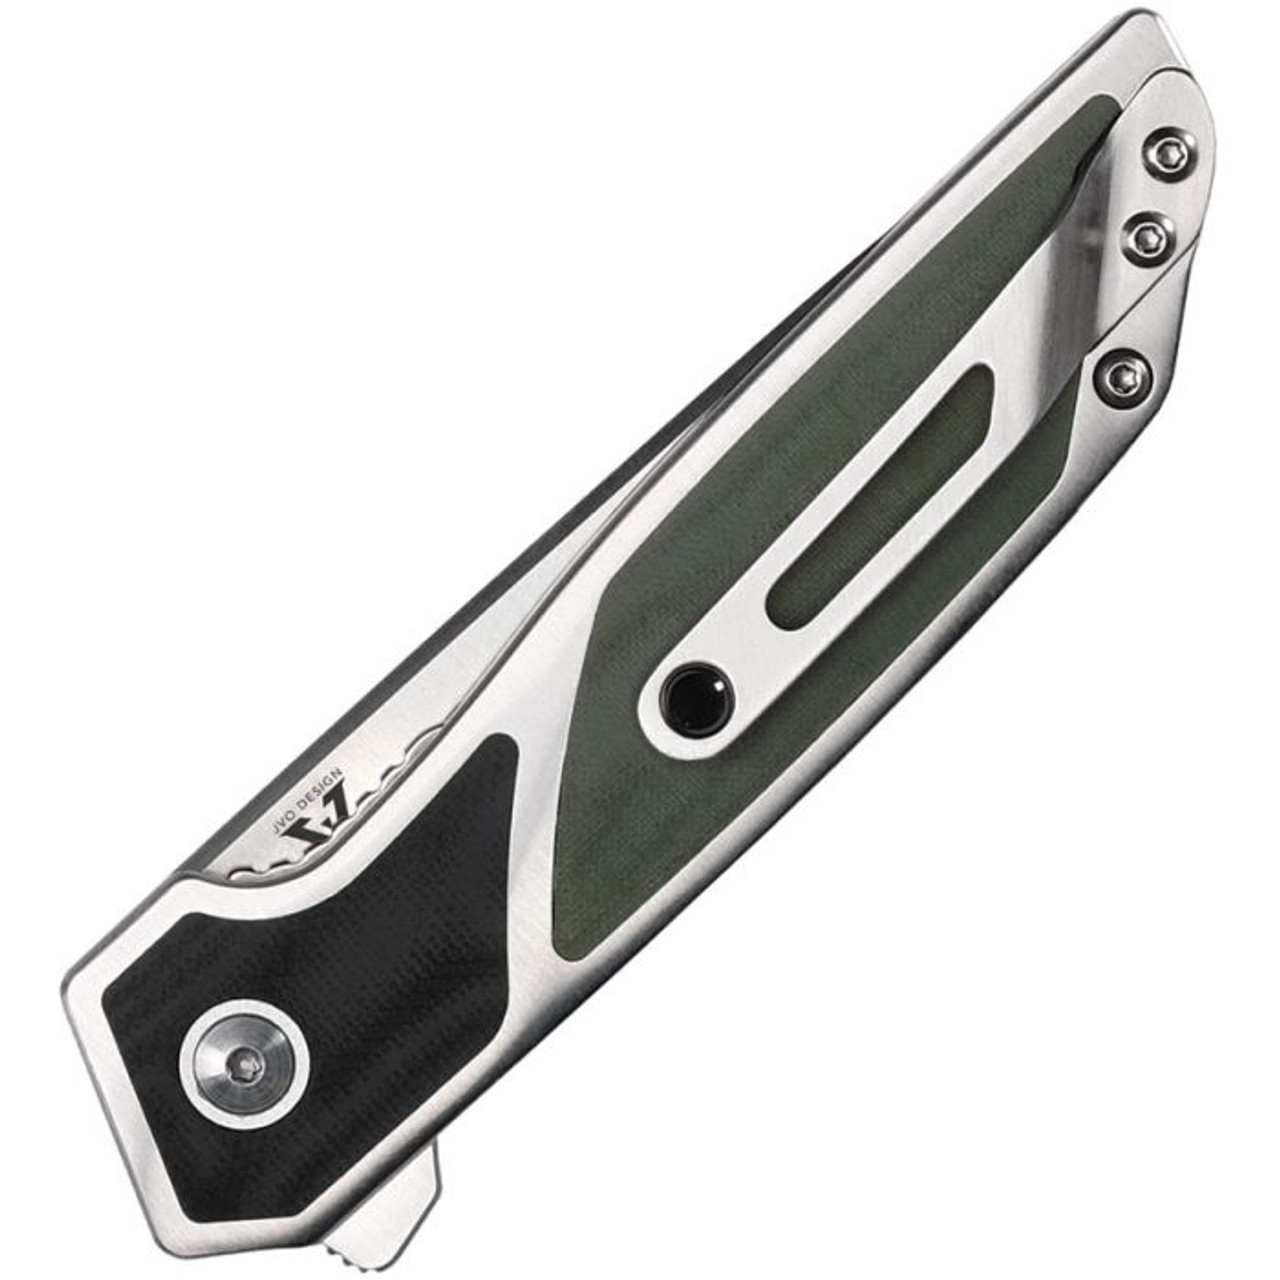 Begg Knives Diamici (BG014) 3" D2 Satin Straight Back Plain Blade, Stainless Steel Handle w/ Black and Green G-10 Inlay